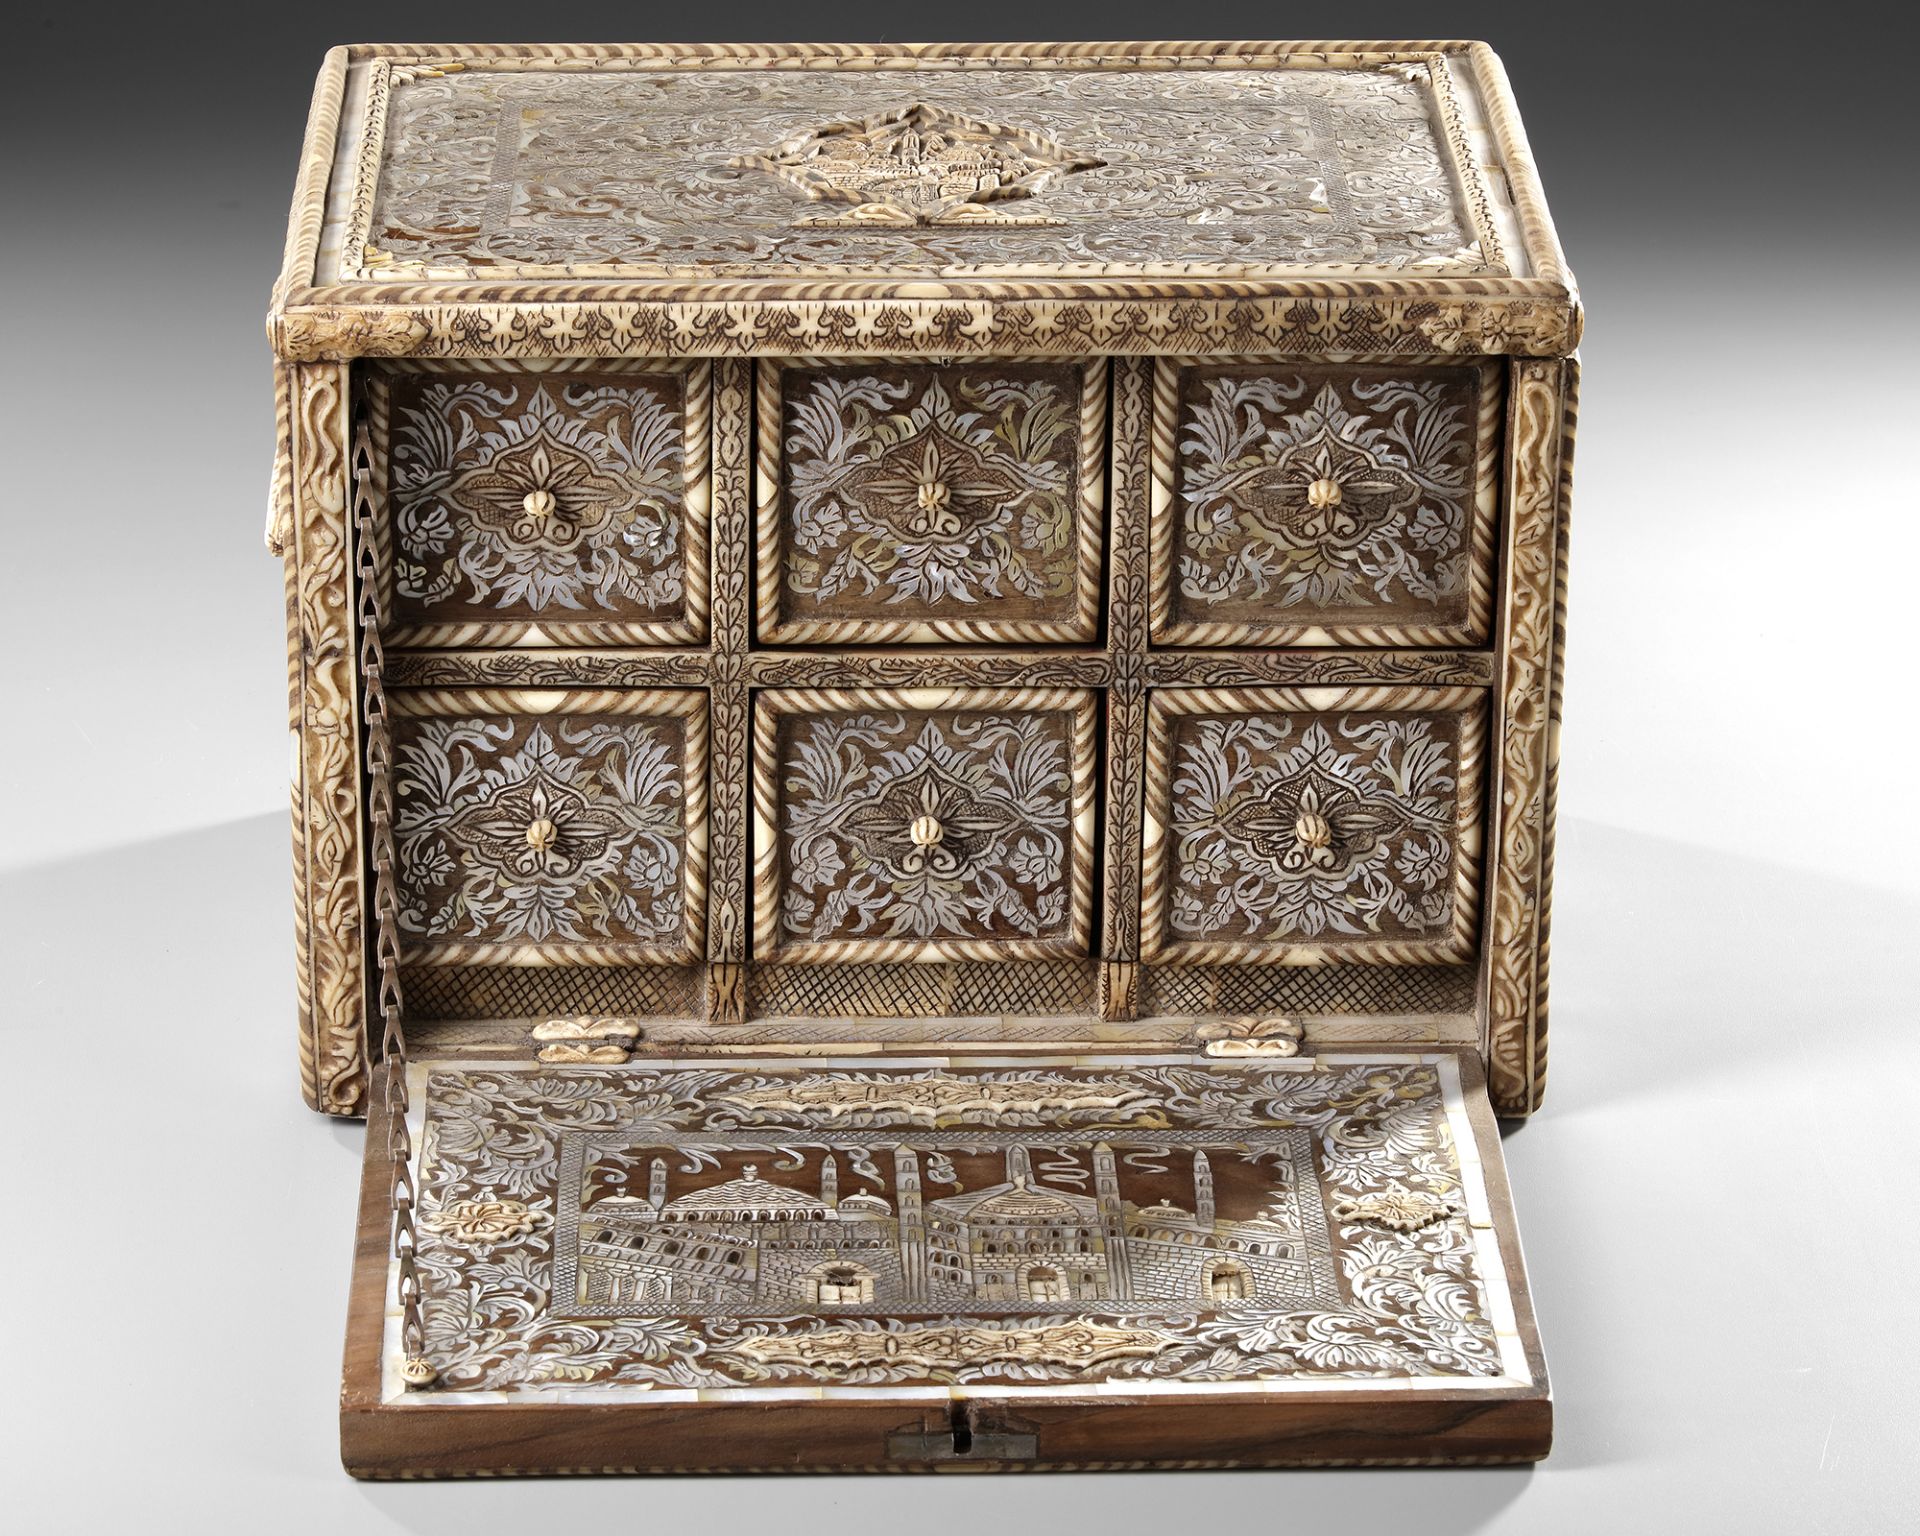 AN OTTOMAN MOTHER-OF-PEARL AND BONE INLAID CABINET, TURKEY OR SYRIA, 18TH-19TH CENTURY - Bild 3 aus 6